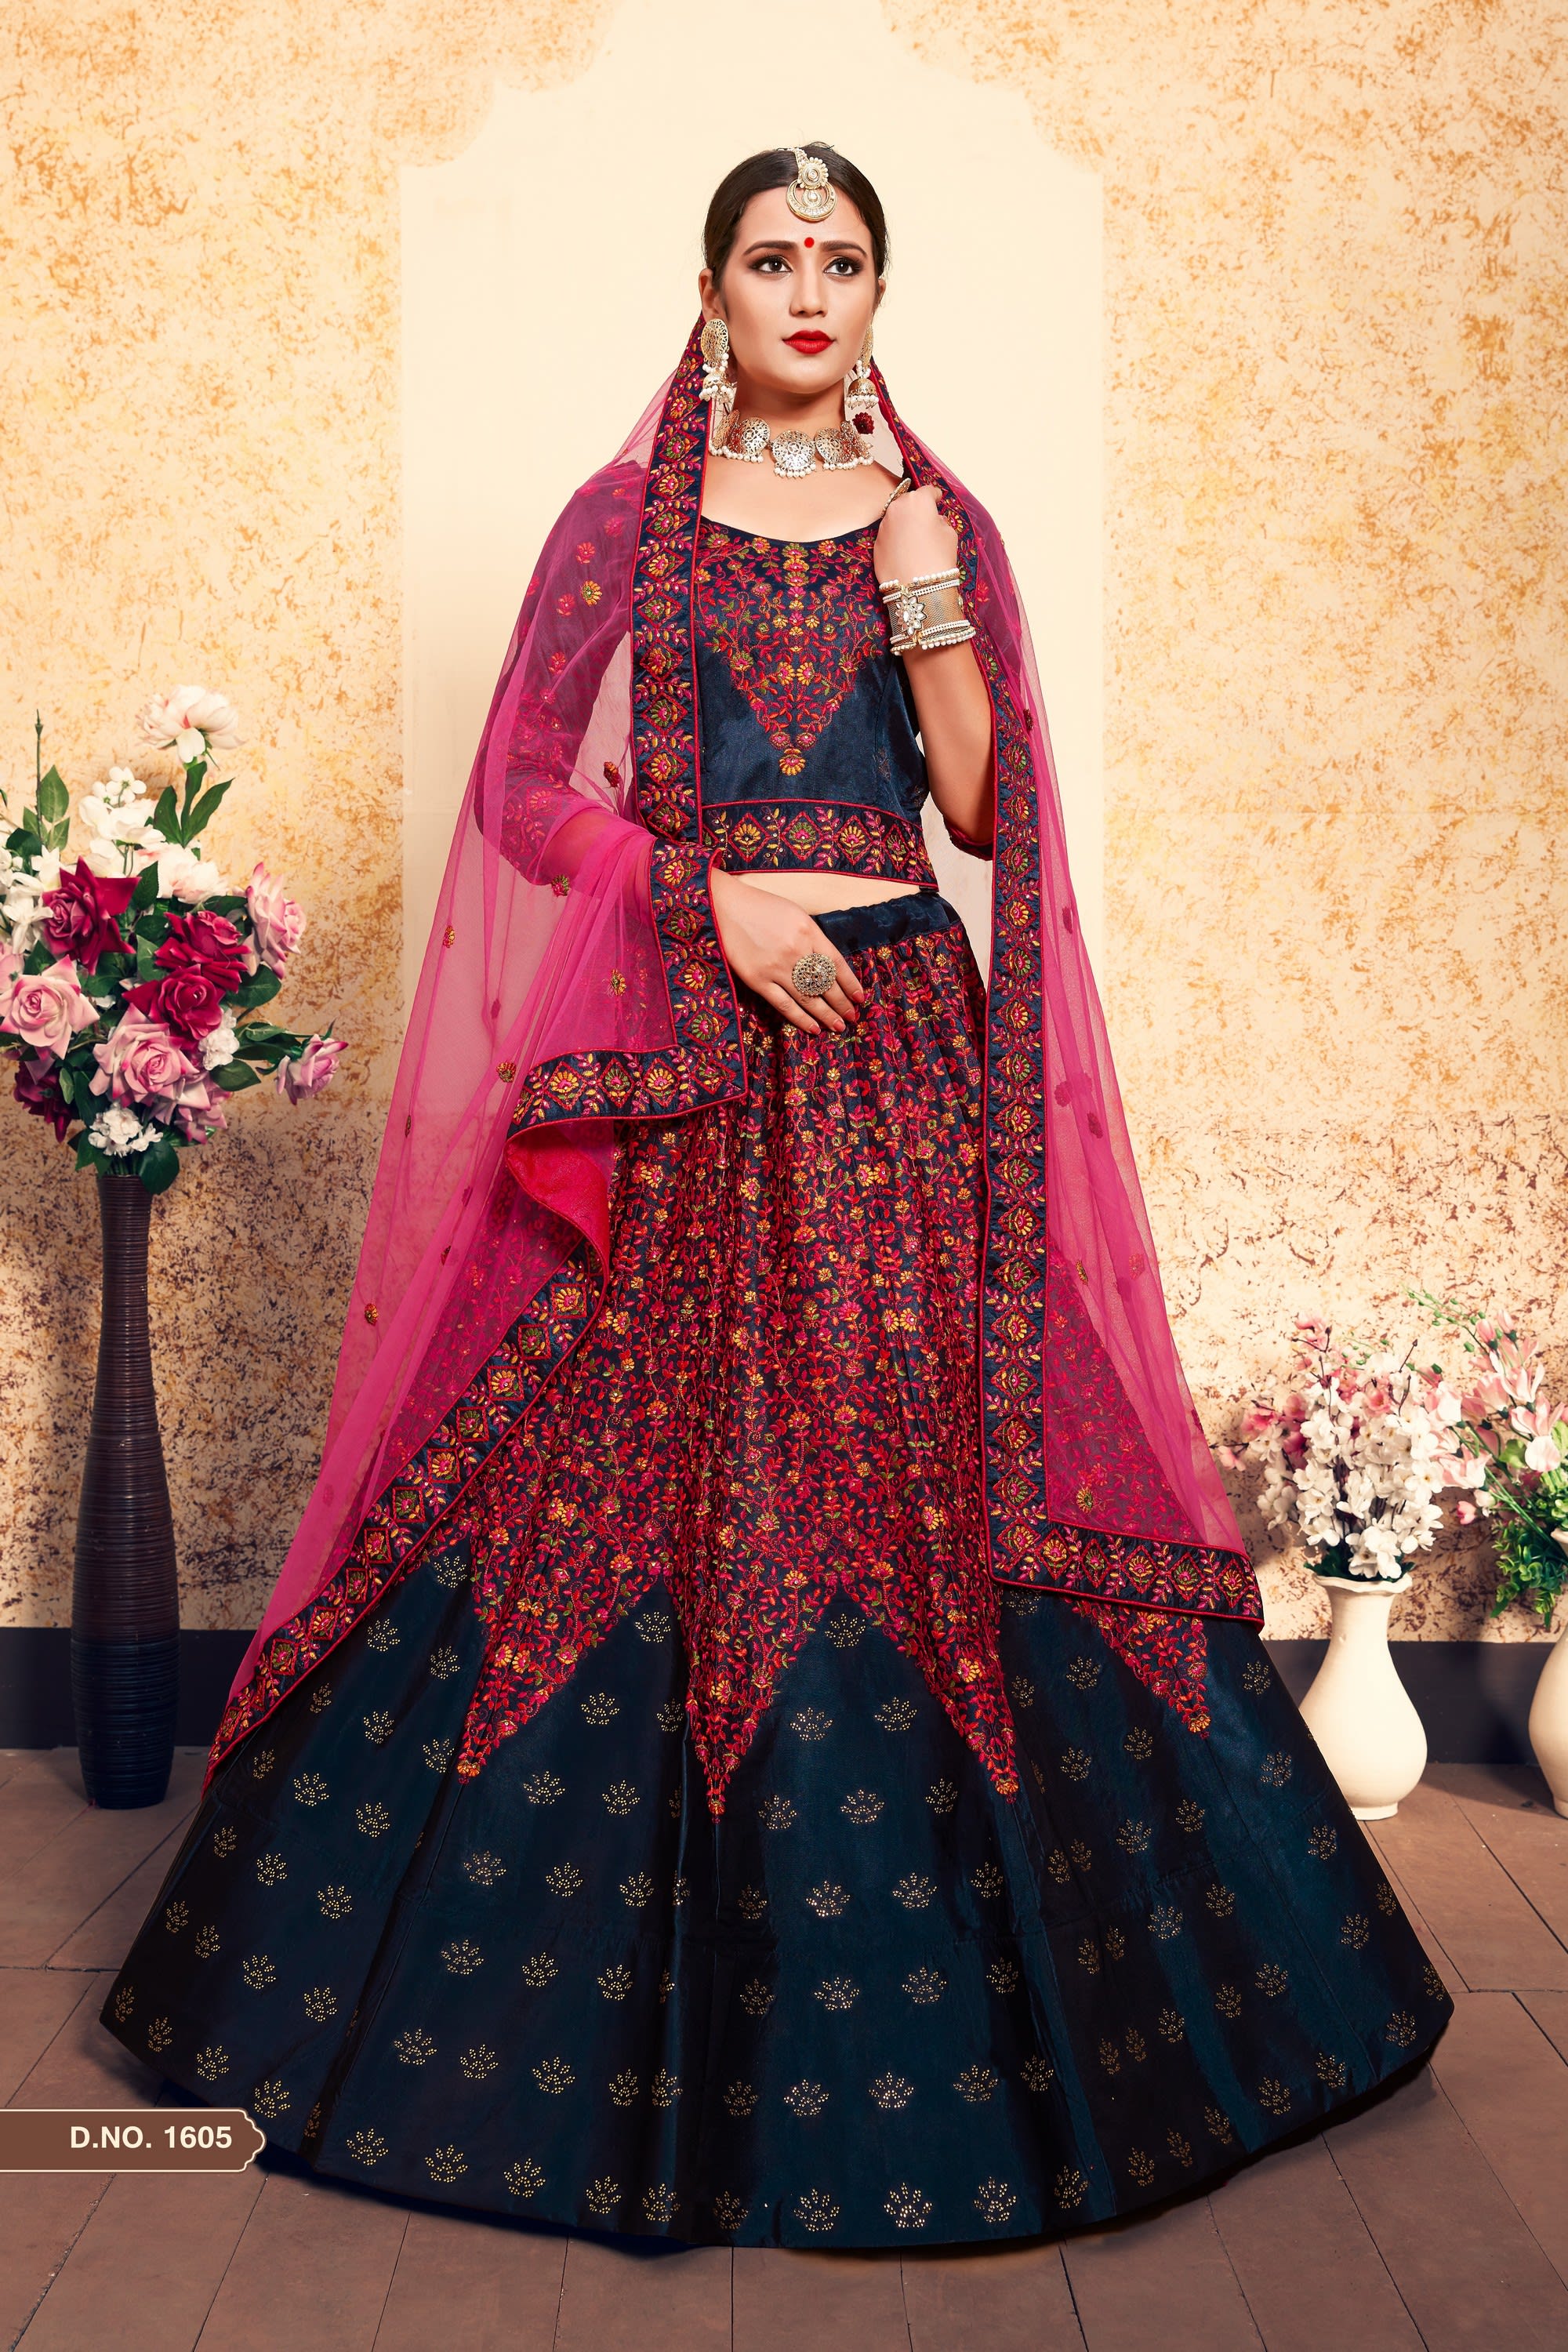 5 Stunning Lehenga Colors that Are Not Red - Bridals.PK